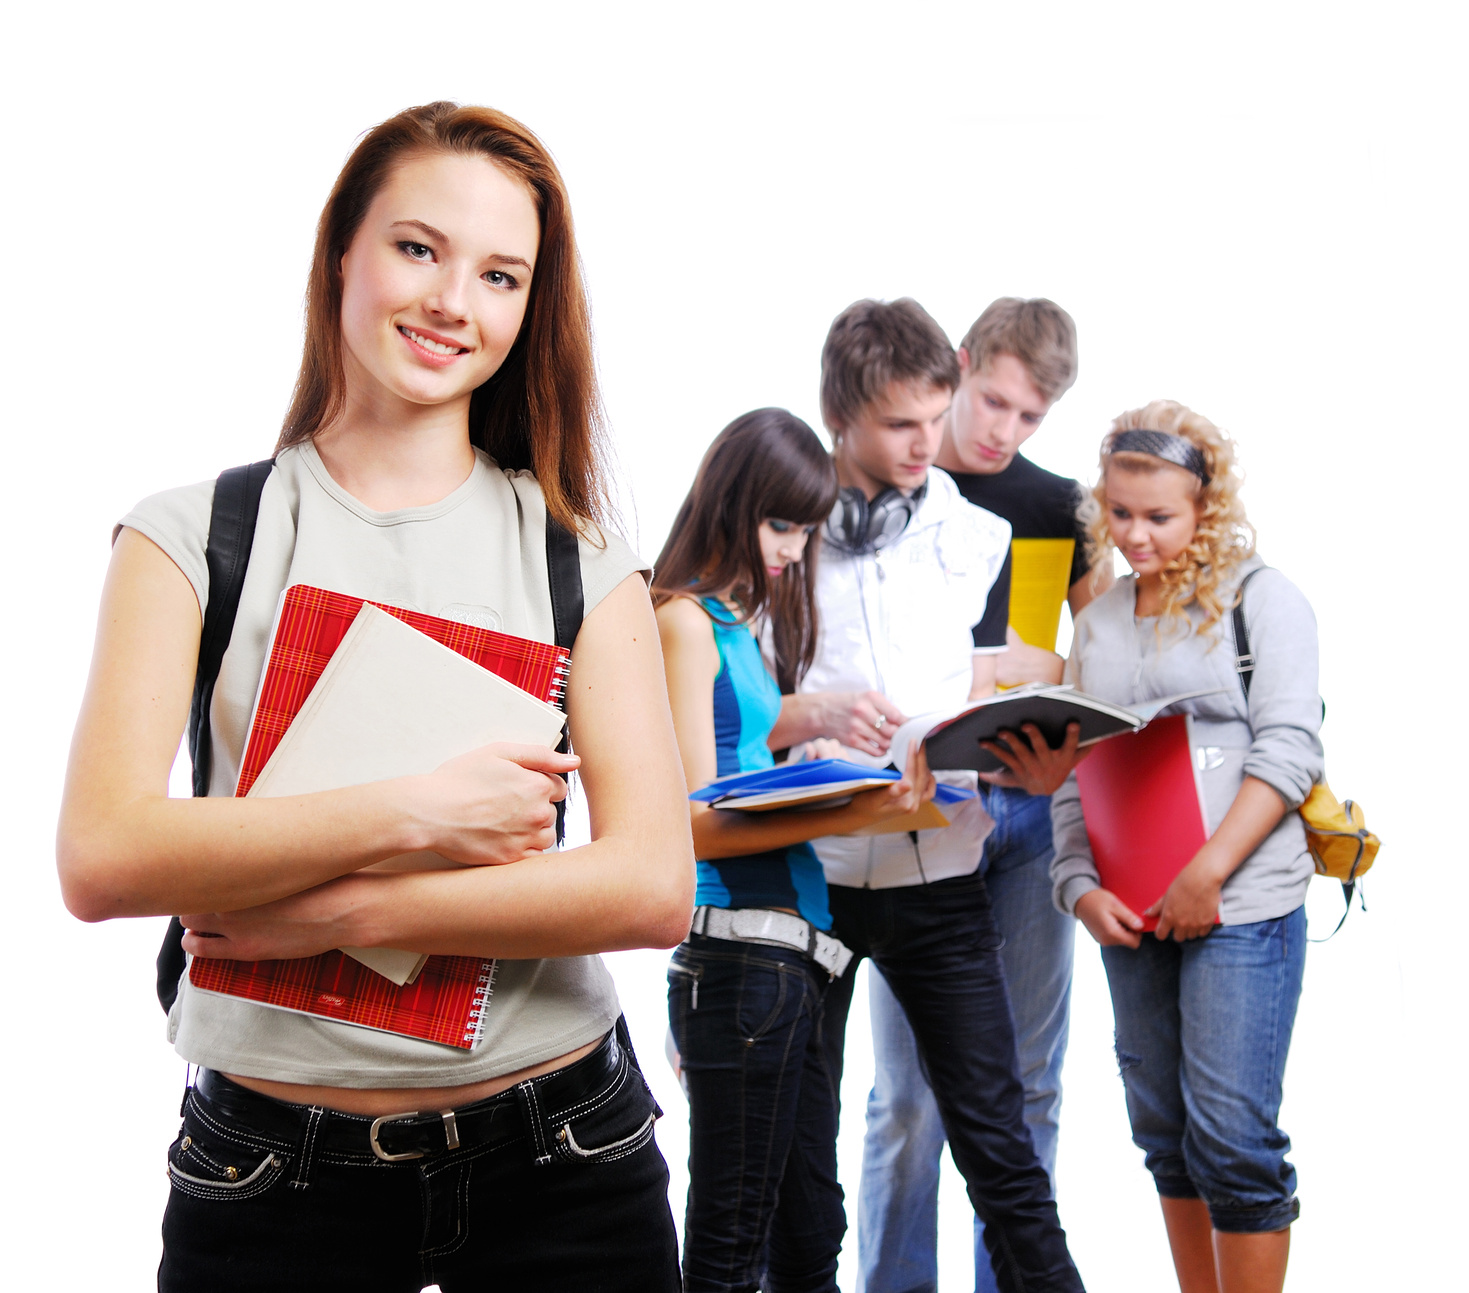 Graceful female student with books in hands looking at camera. On a background classmates